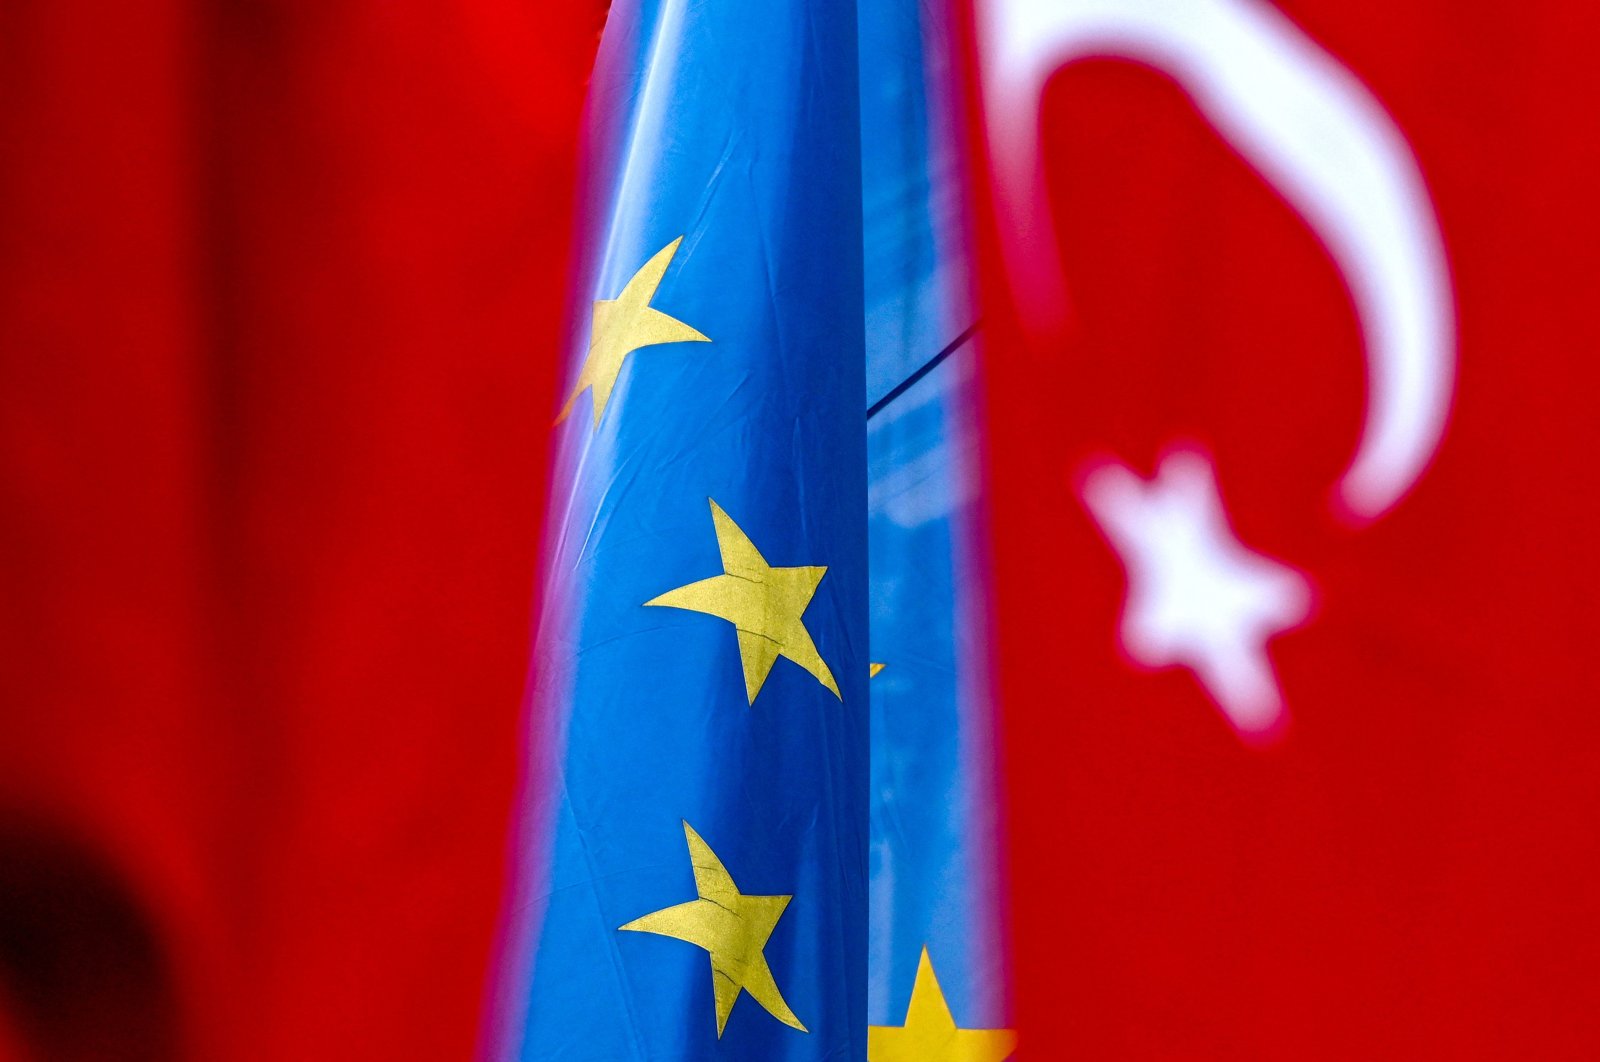 A European flag and a Turkish national flag fly near Taksim Square in Istanbul, Turkey, Oct. 25, 2021 (AFP Photo)